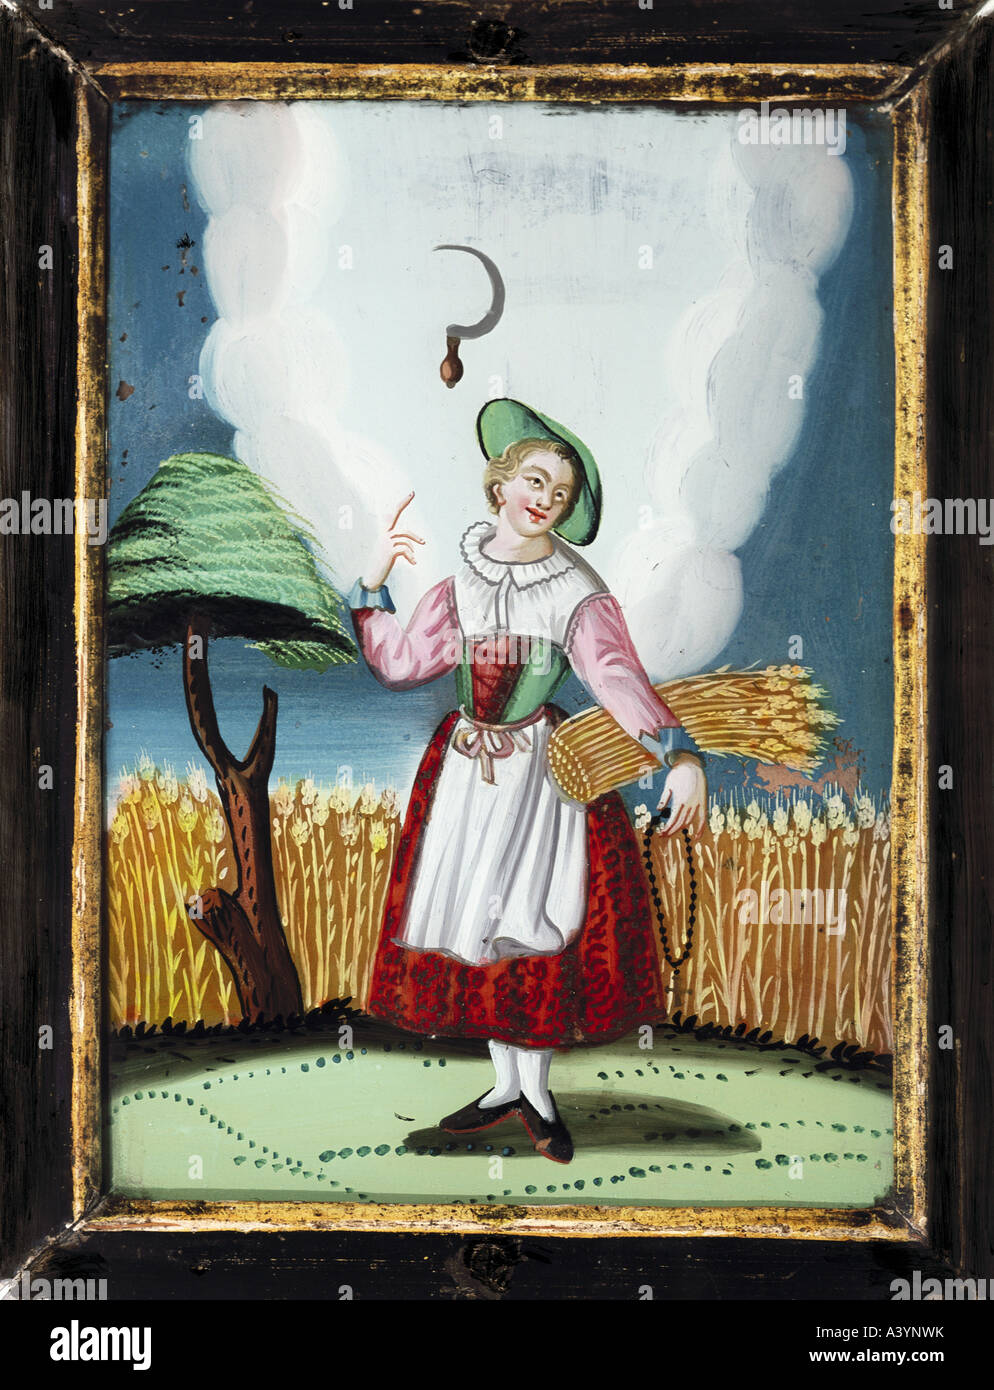 fine arts, religious art, saints, Notburga, as patron saint of agriculture, painting, glass painting, Tyrol, early 19th century, Stock Photo